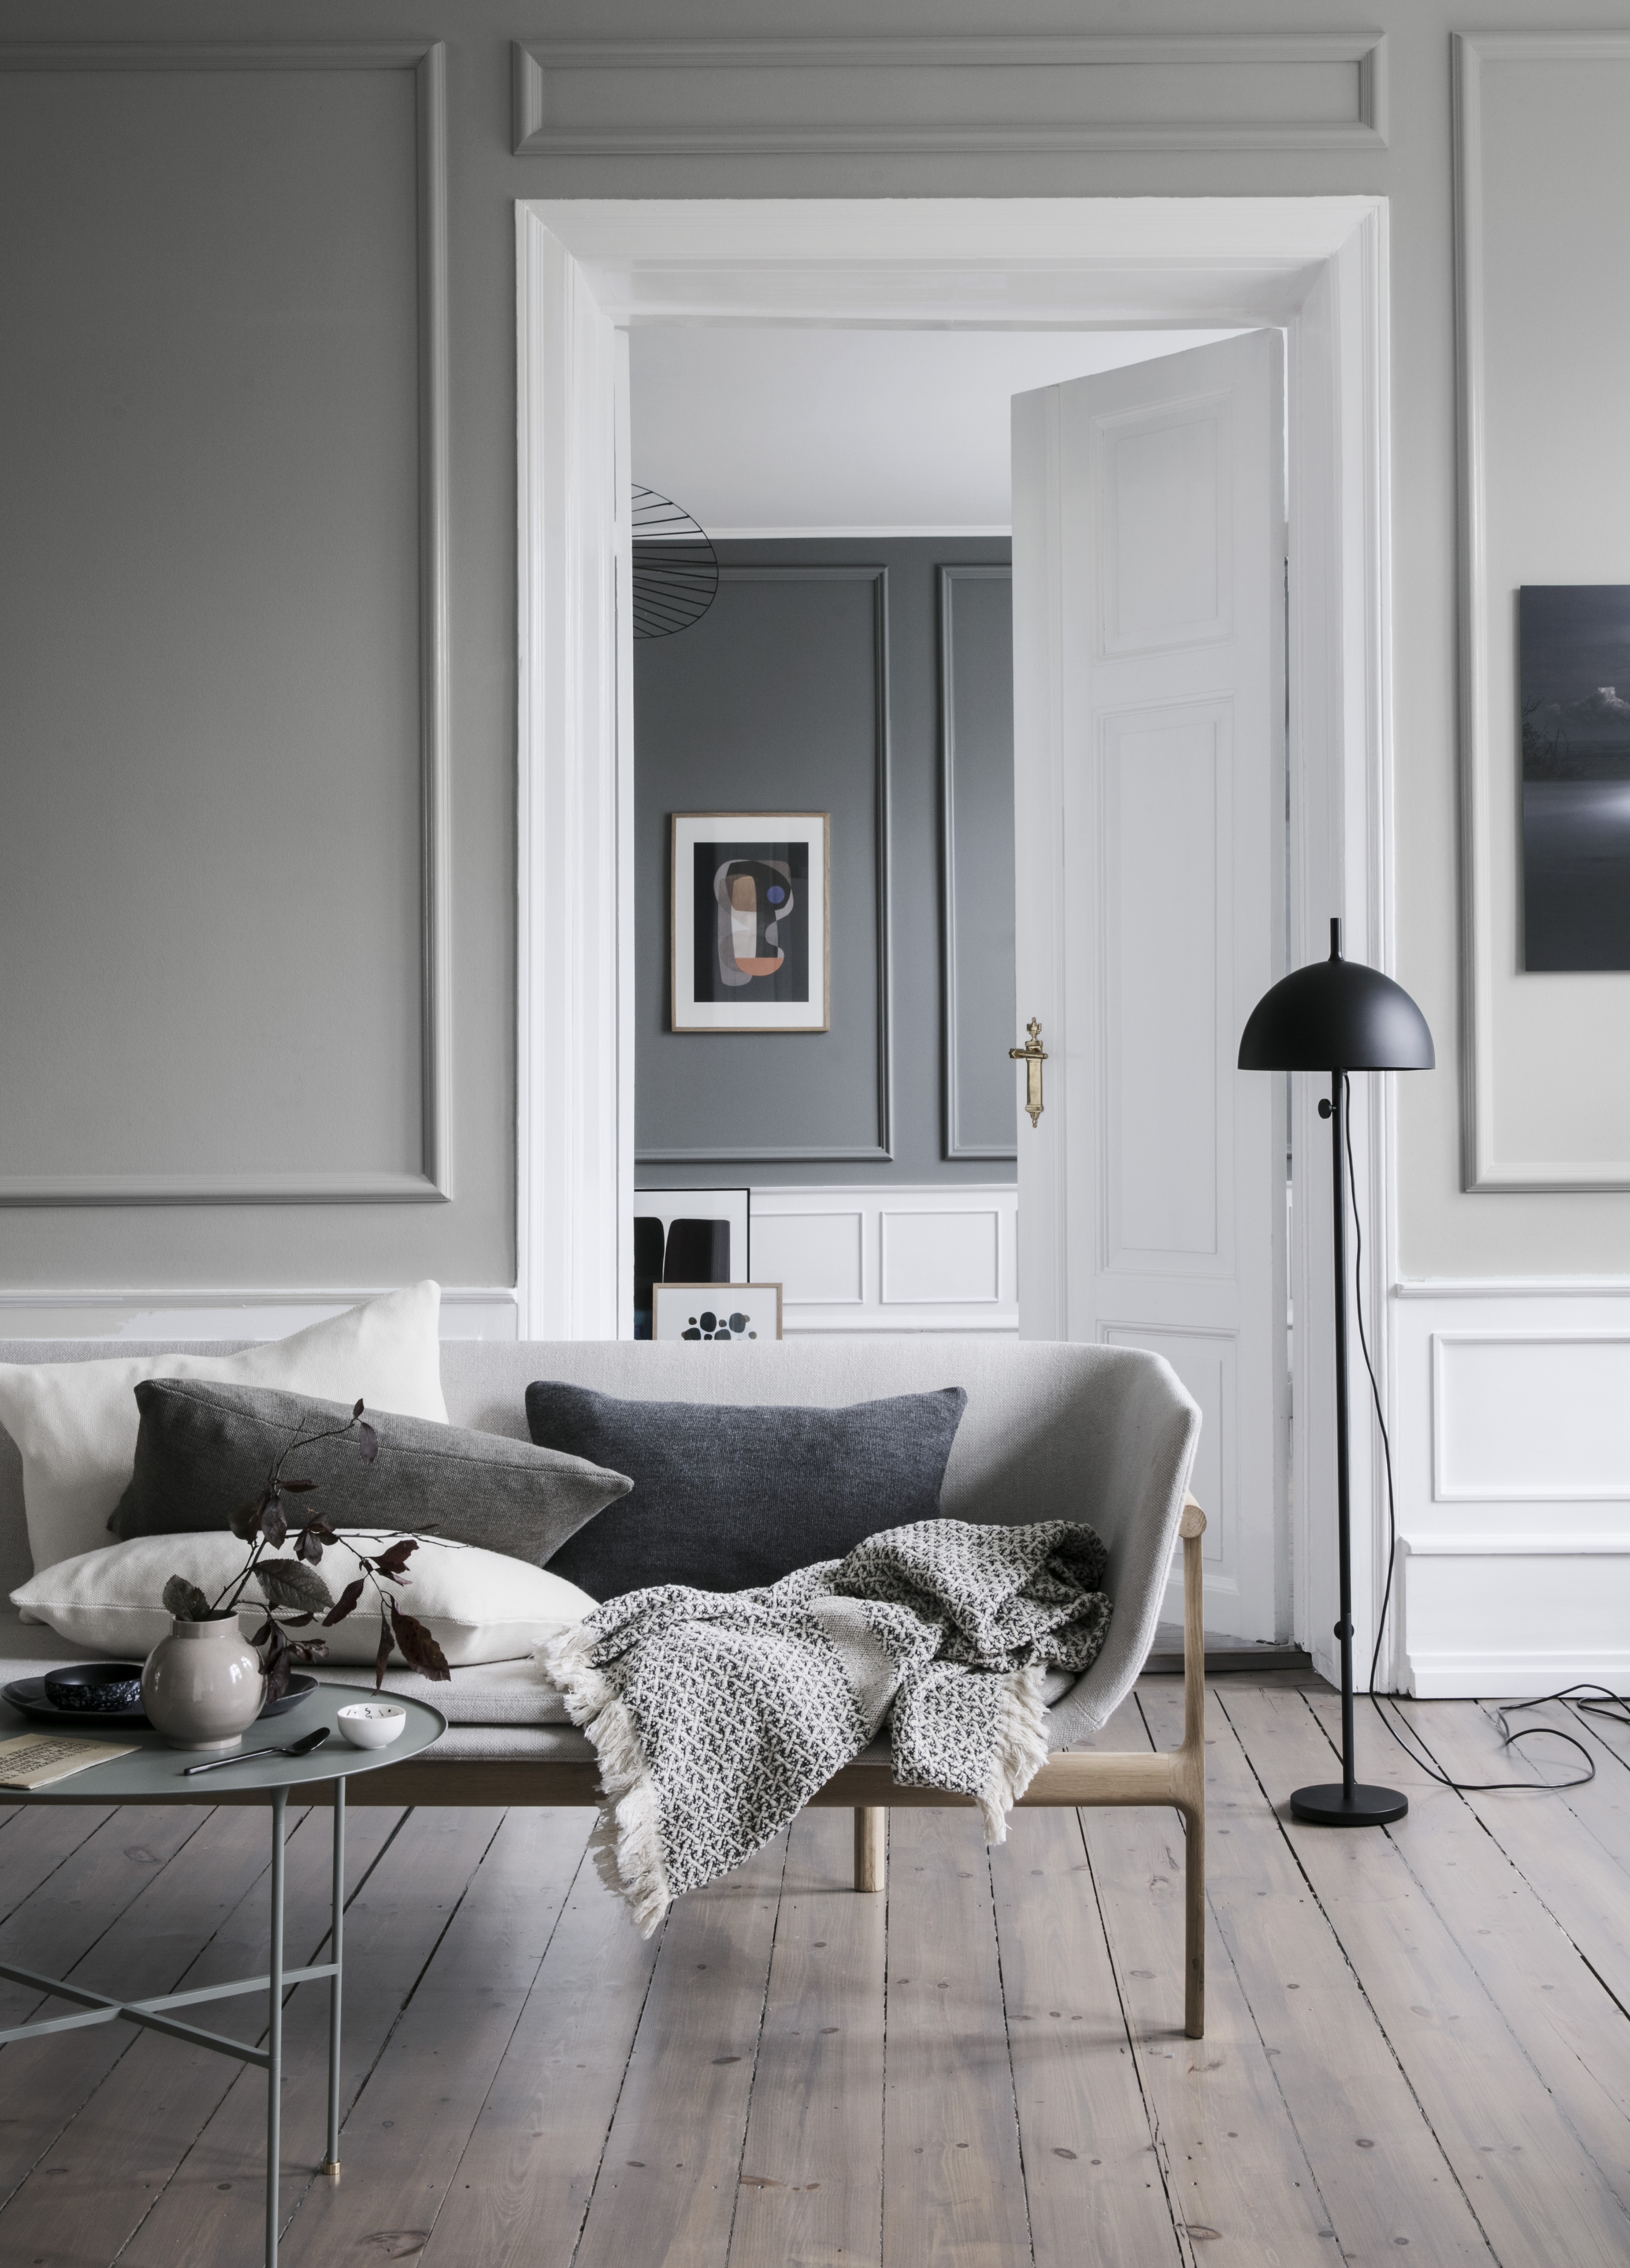 A modern grey living room by Urban Avenue using different tones of light and dark grey paint, pale wooden flooring and black floor lamp